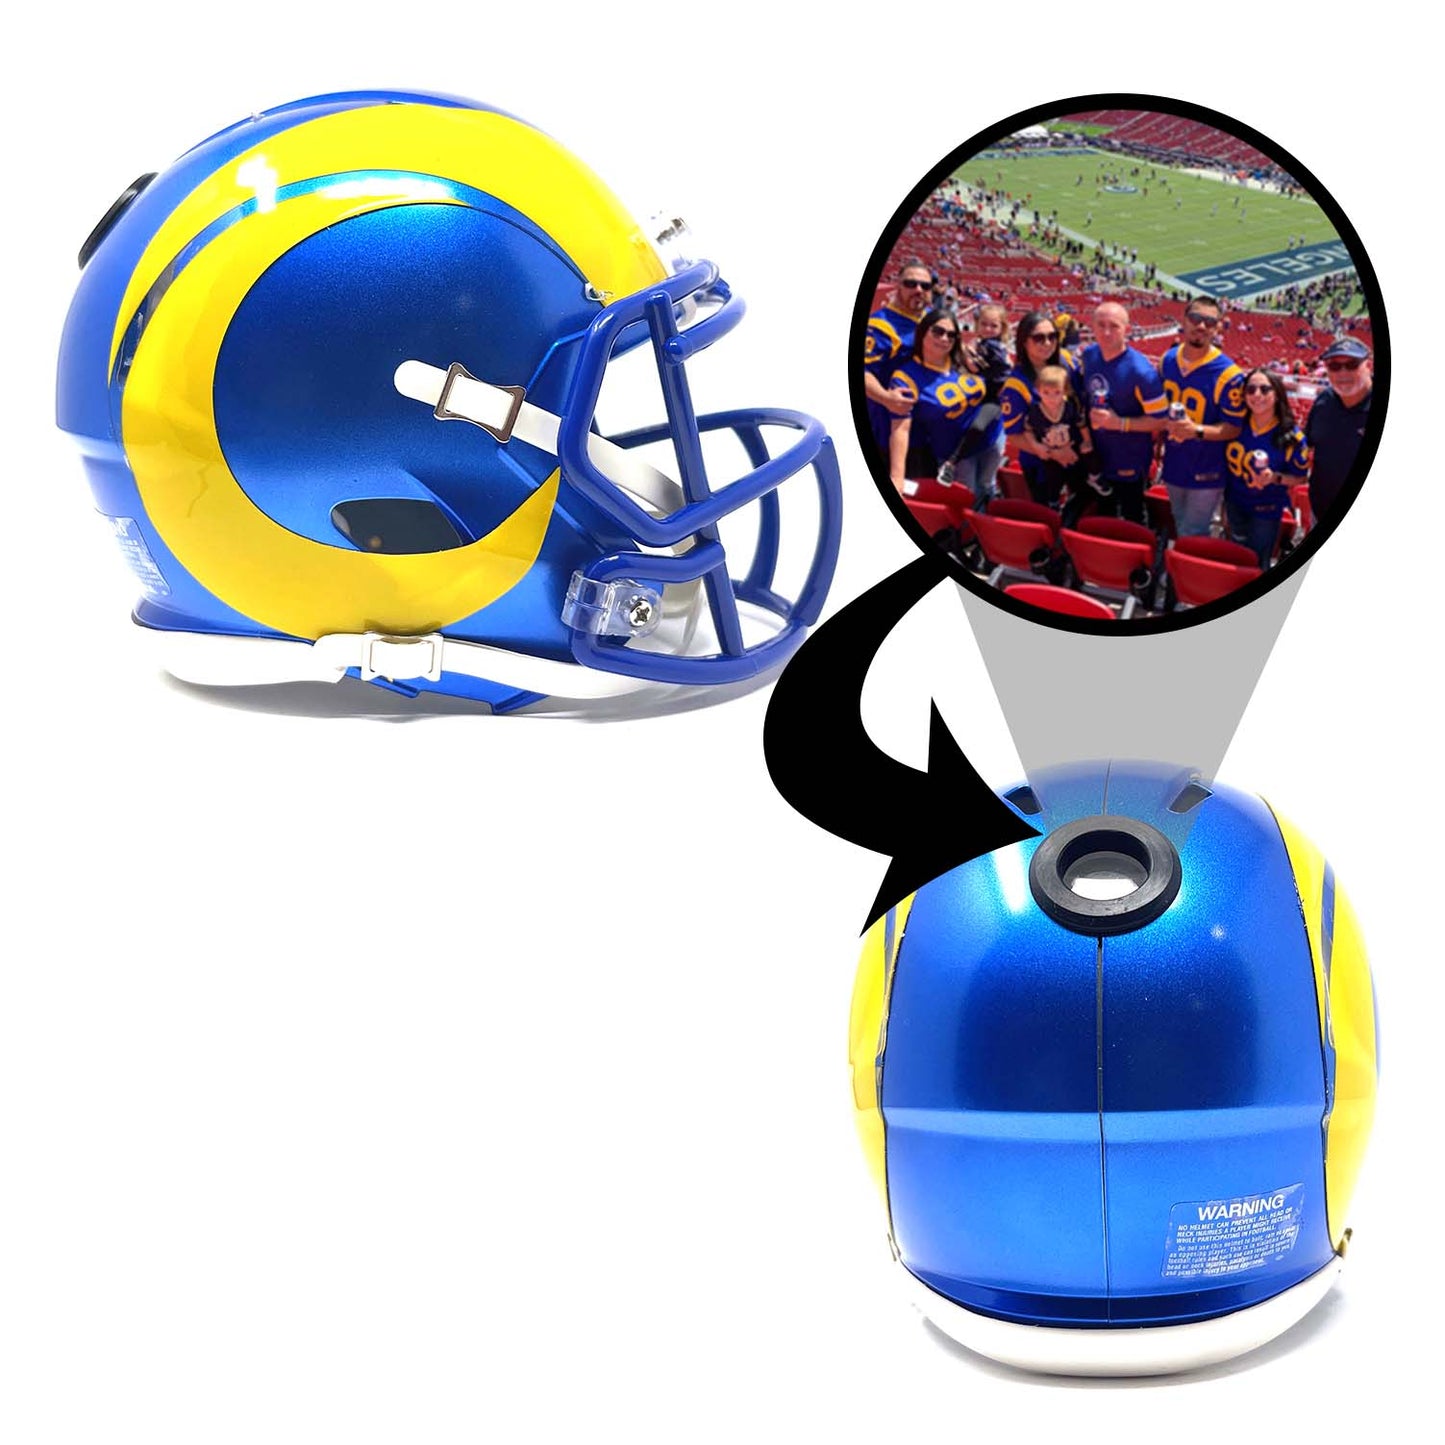 Los Angeles Rams NFL Collectible Mini Helmet - Picture Inside - FANZ Collectibles